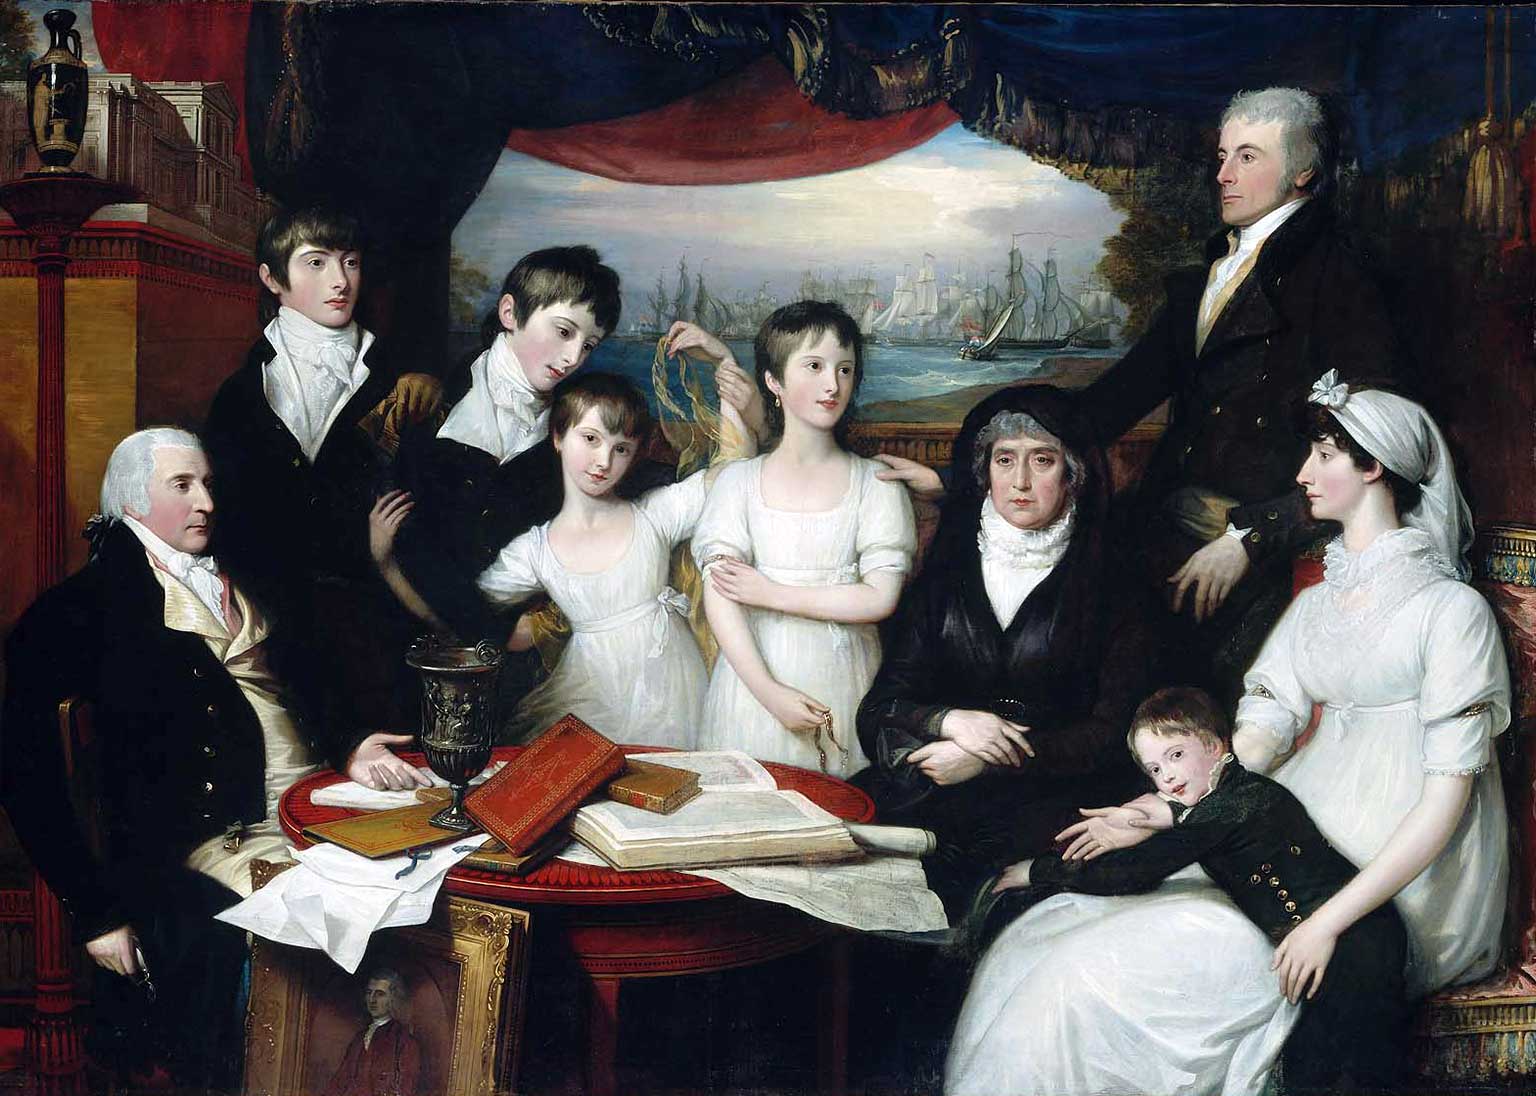 The Hope Family of Sydenham, Kent, painting from 1804 by Benjamin West